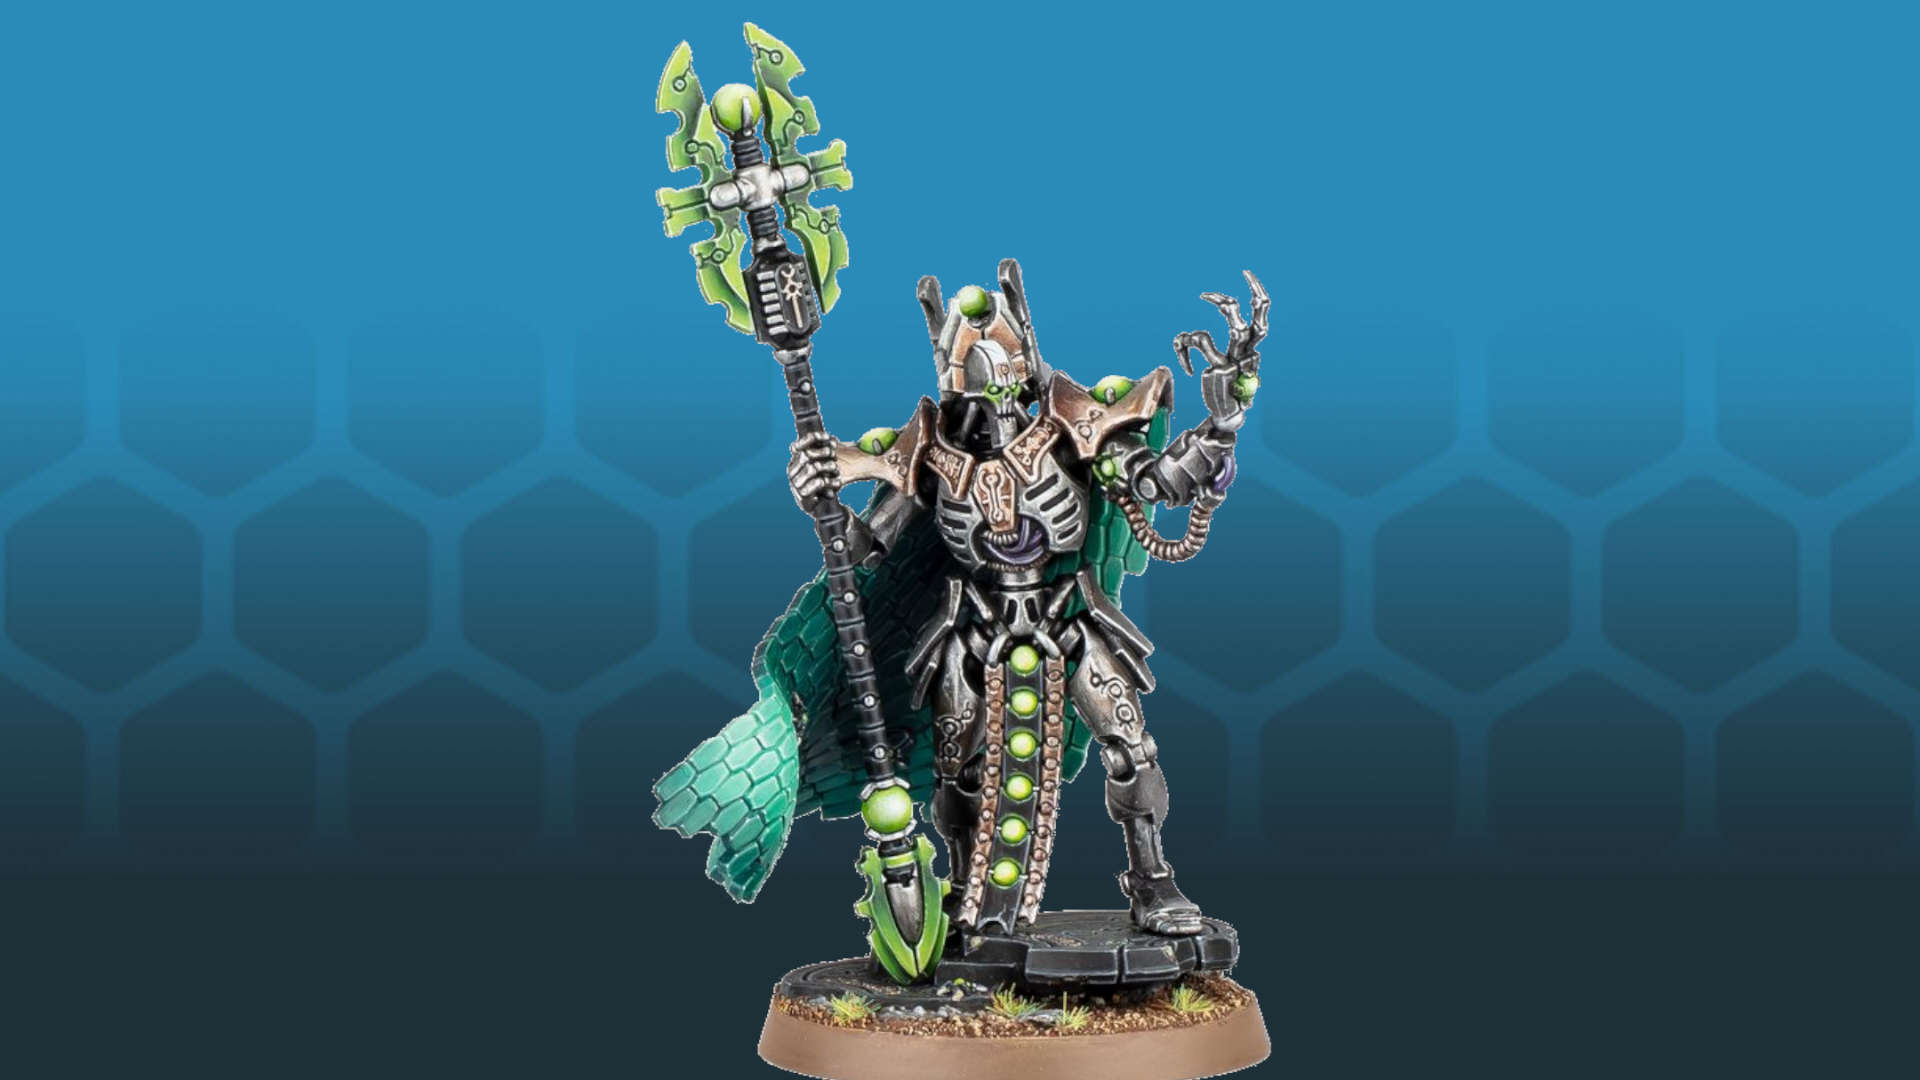 Warhammer 40k Necron character Imotekh the Stormlord - a regal android with the aspect of a Pharoah, wielding a huge bladed staff